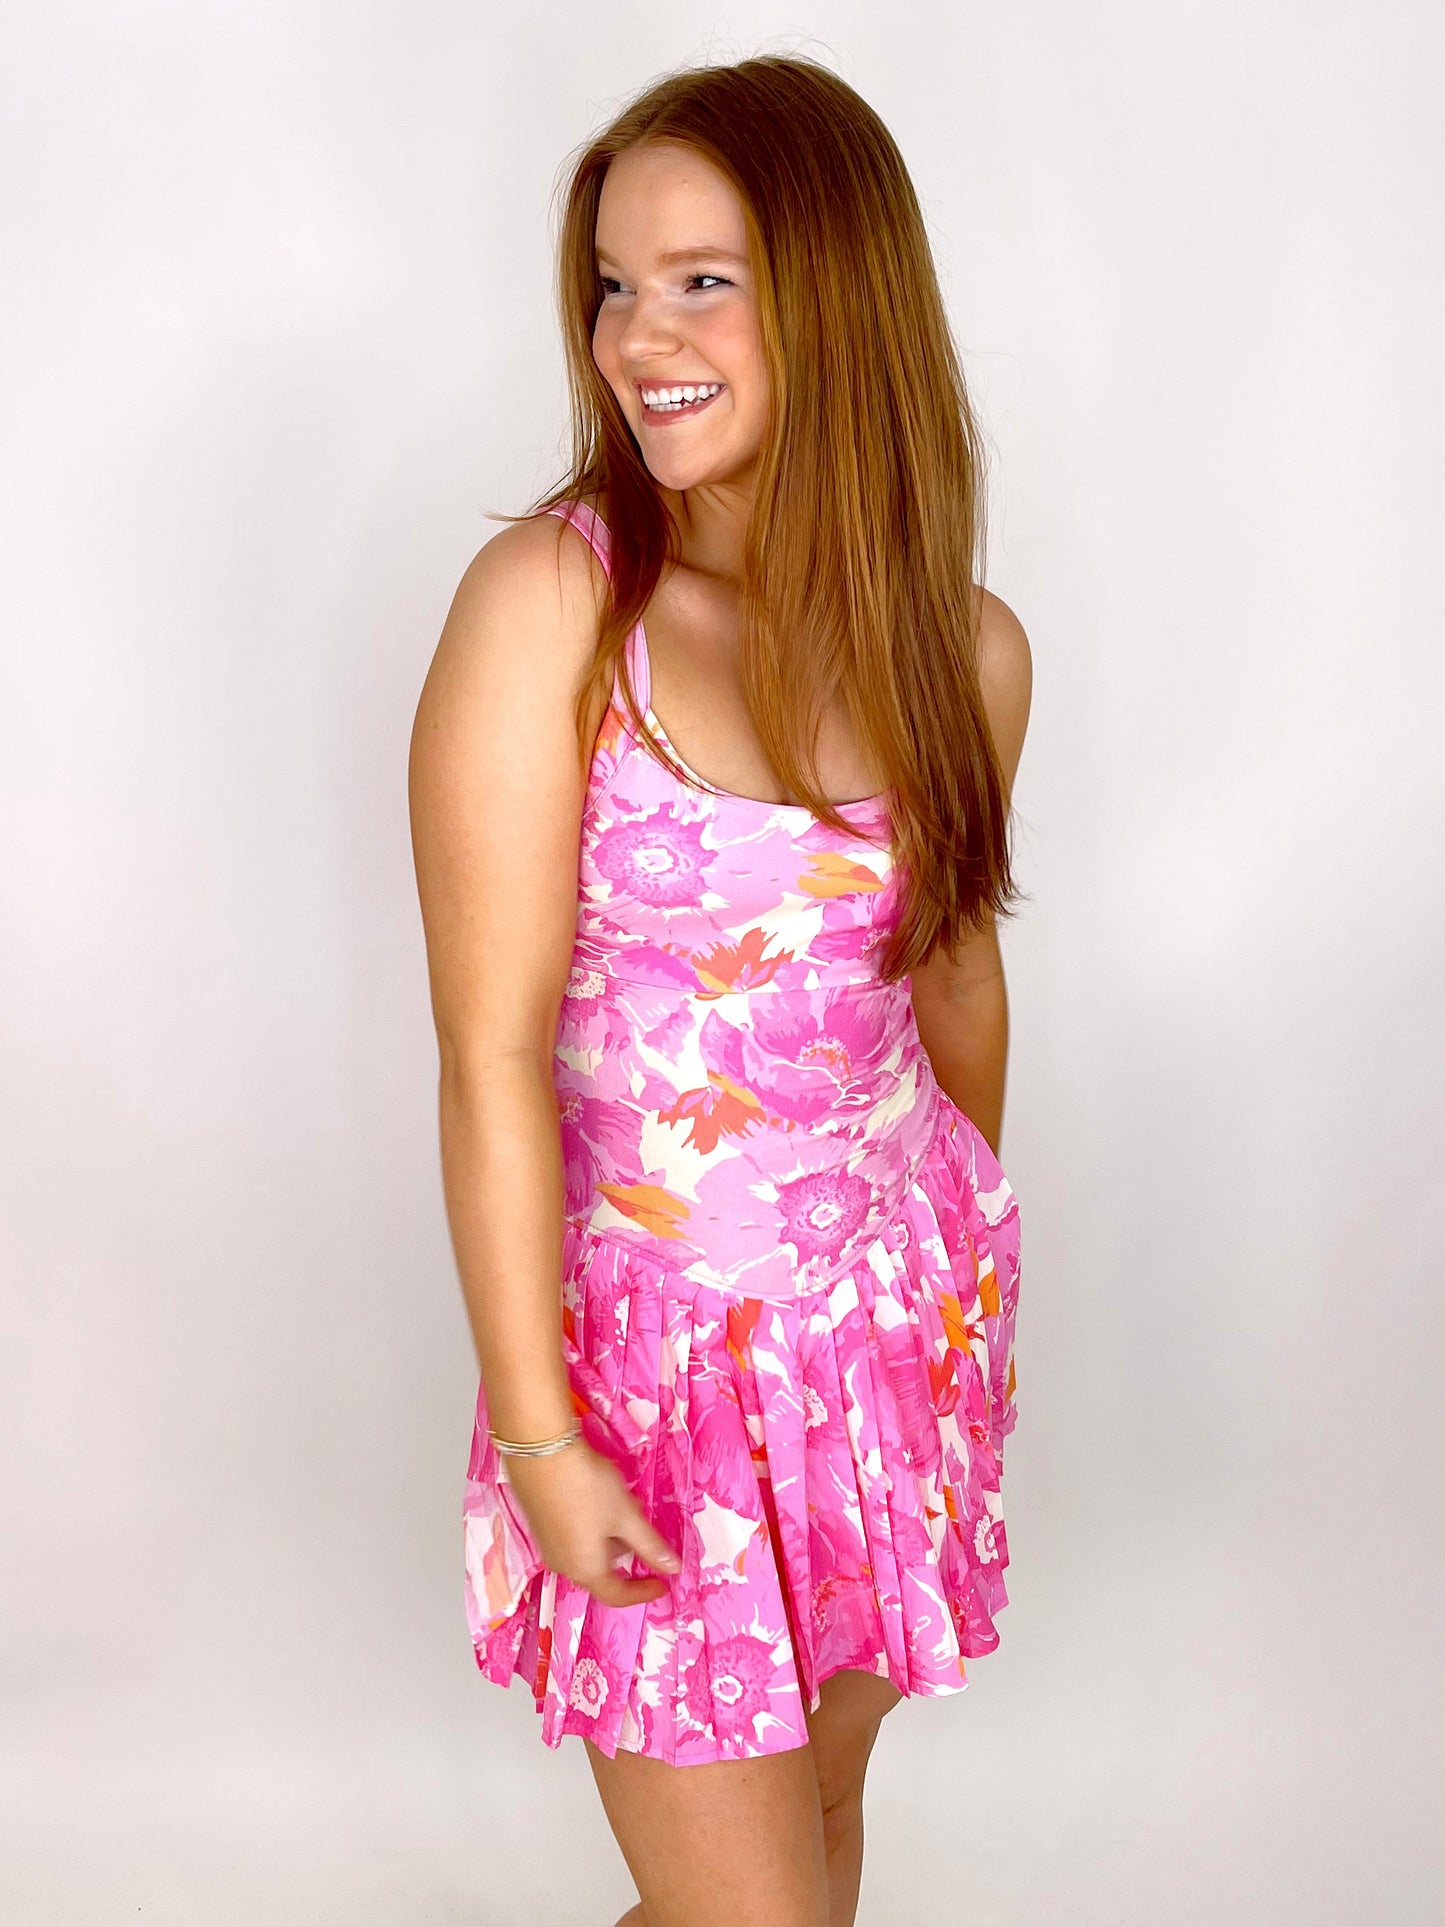 Tropic Like It's Hot Dress-Athletic Dress-Peach Love California-The Village Shoppe, Women’s Fashion Boutique, Shop Online and In Store - Located in Muscle Shoals, AL.